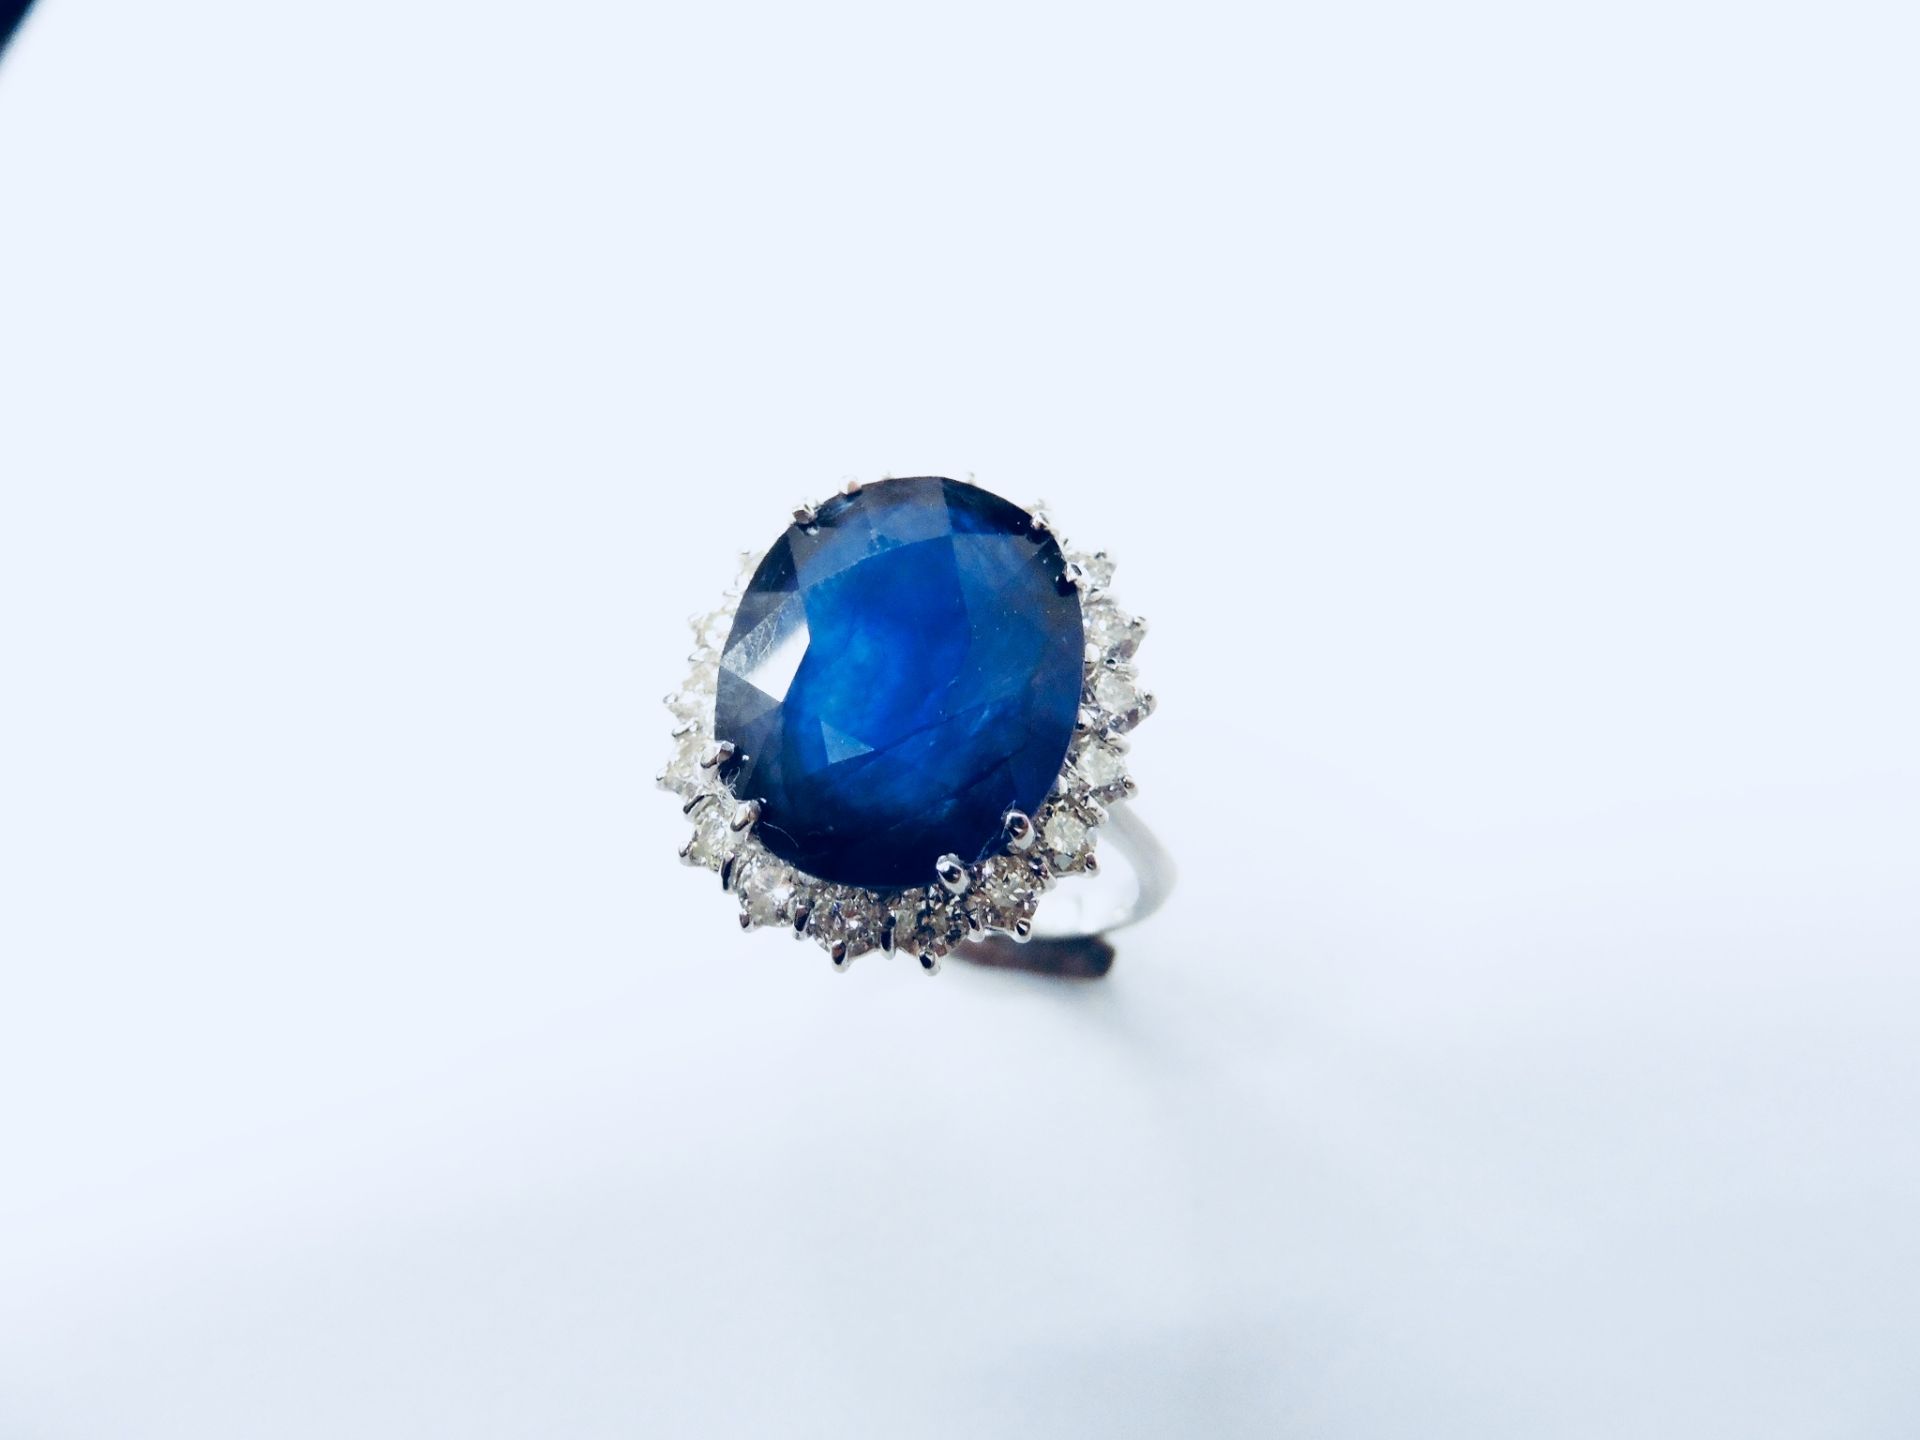 10Ct Sapphire And Diamond Cluster Ring. - Image 5 of 9